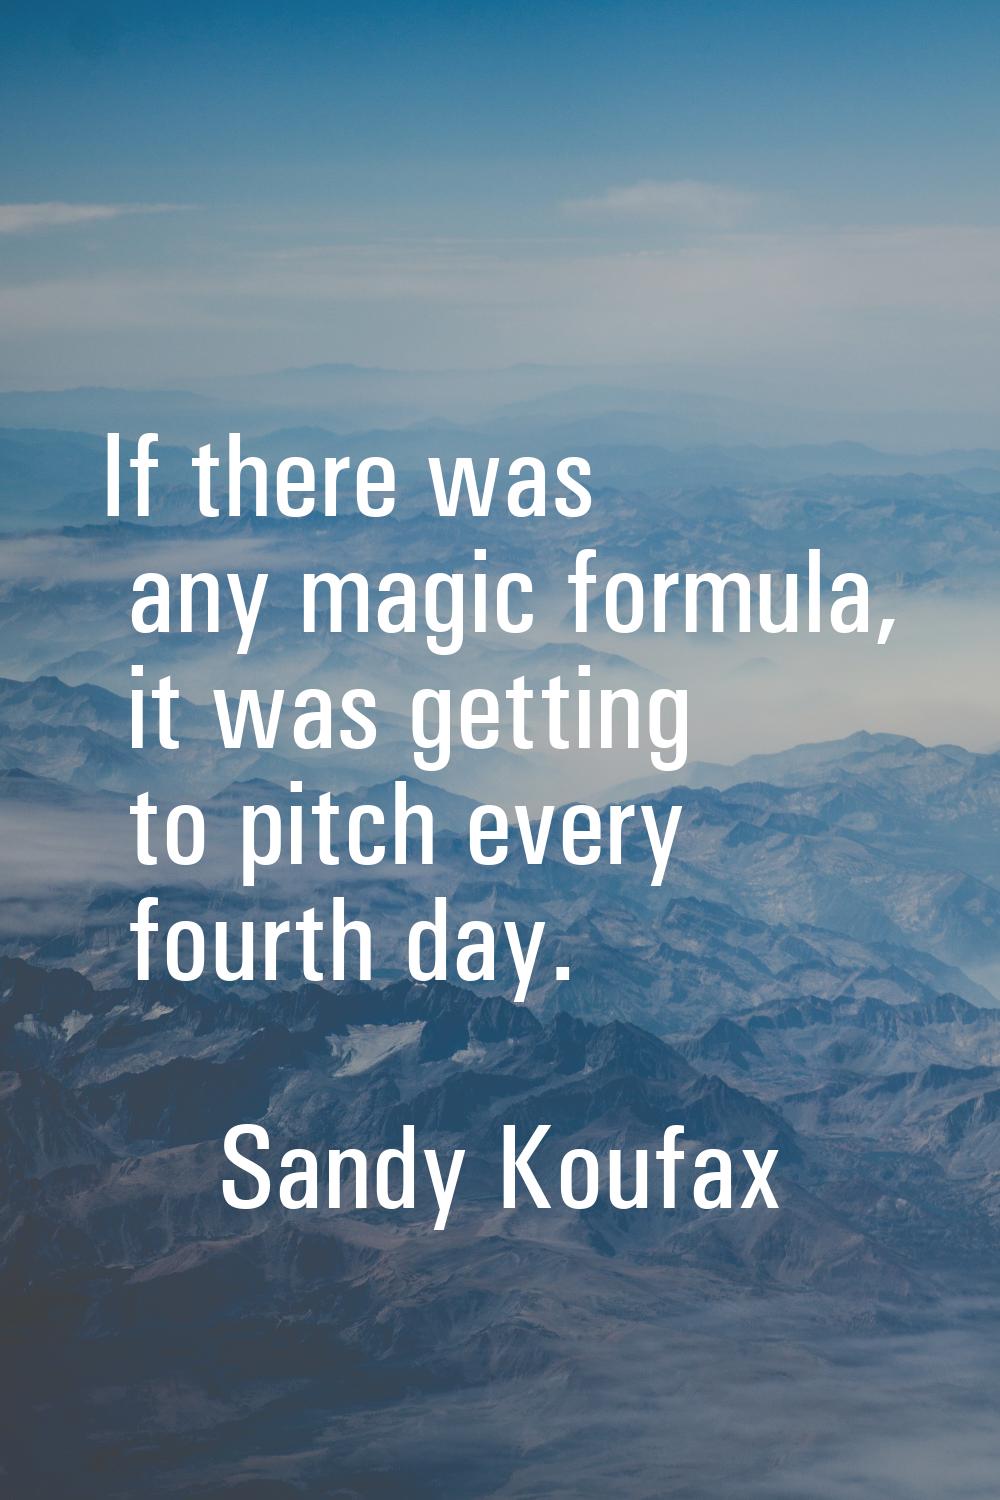 If there was any magic formula, it was getting to pitch every fourth day.